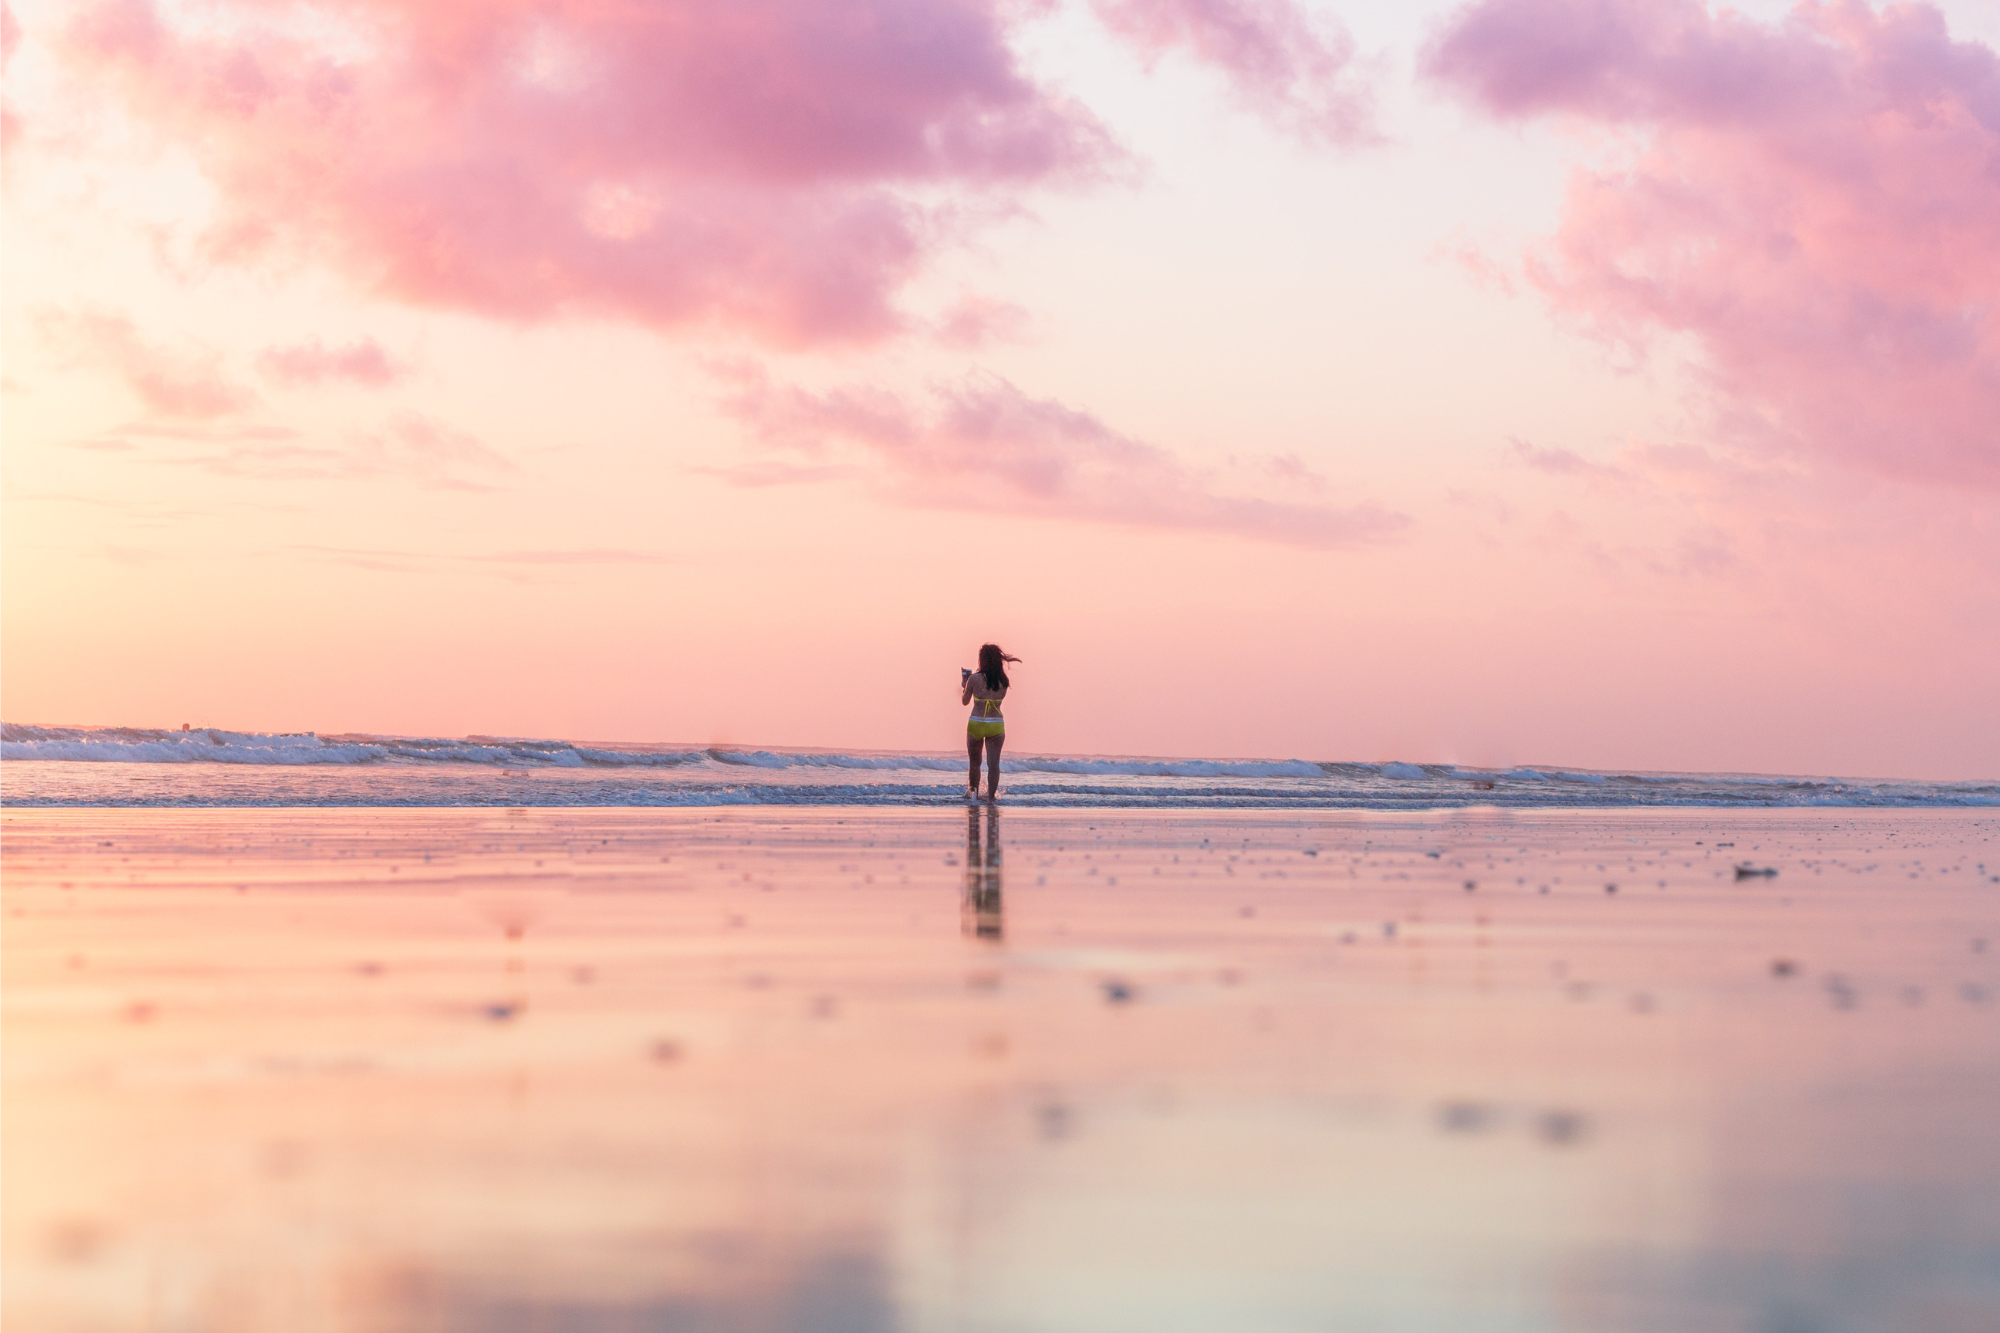 Woman standing in the surf at sunrise as part of her self-care ritual.